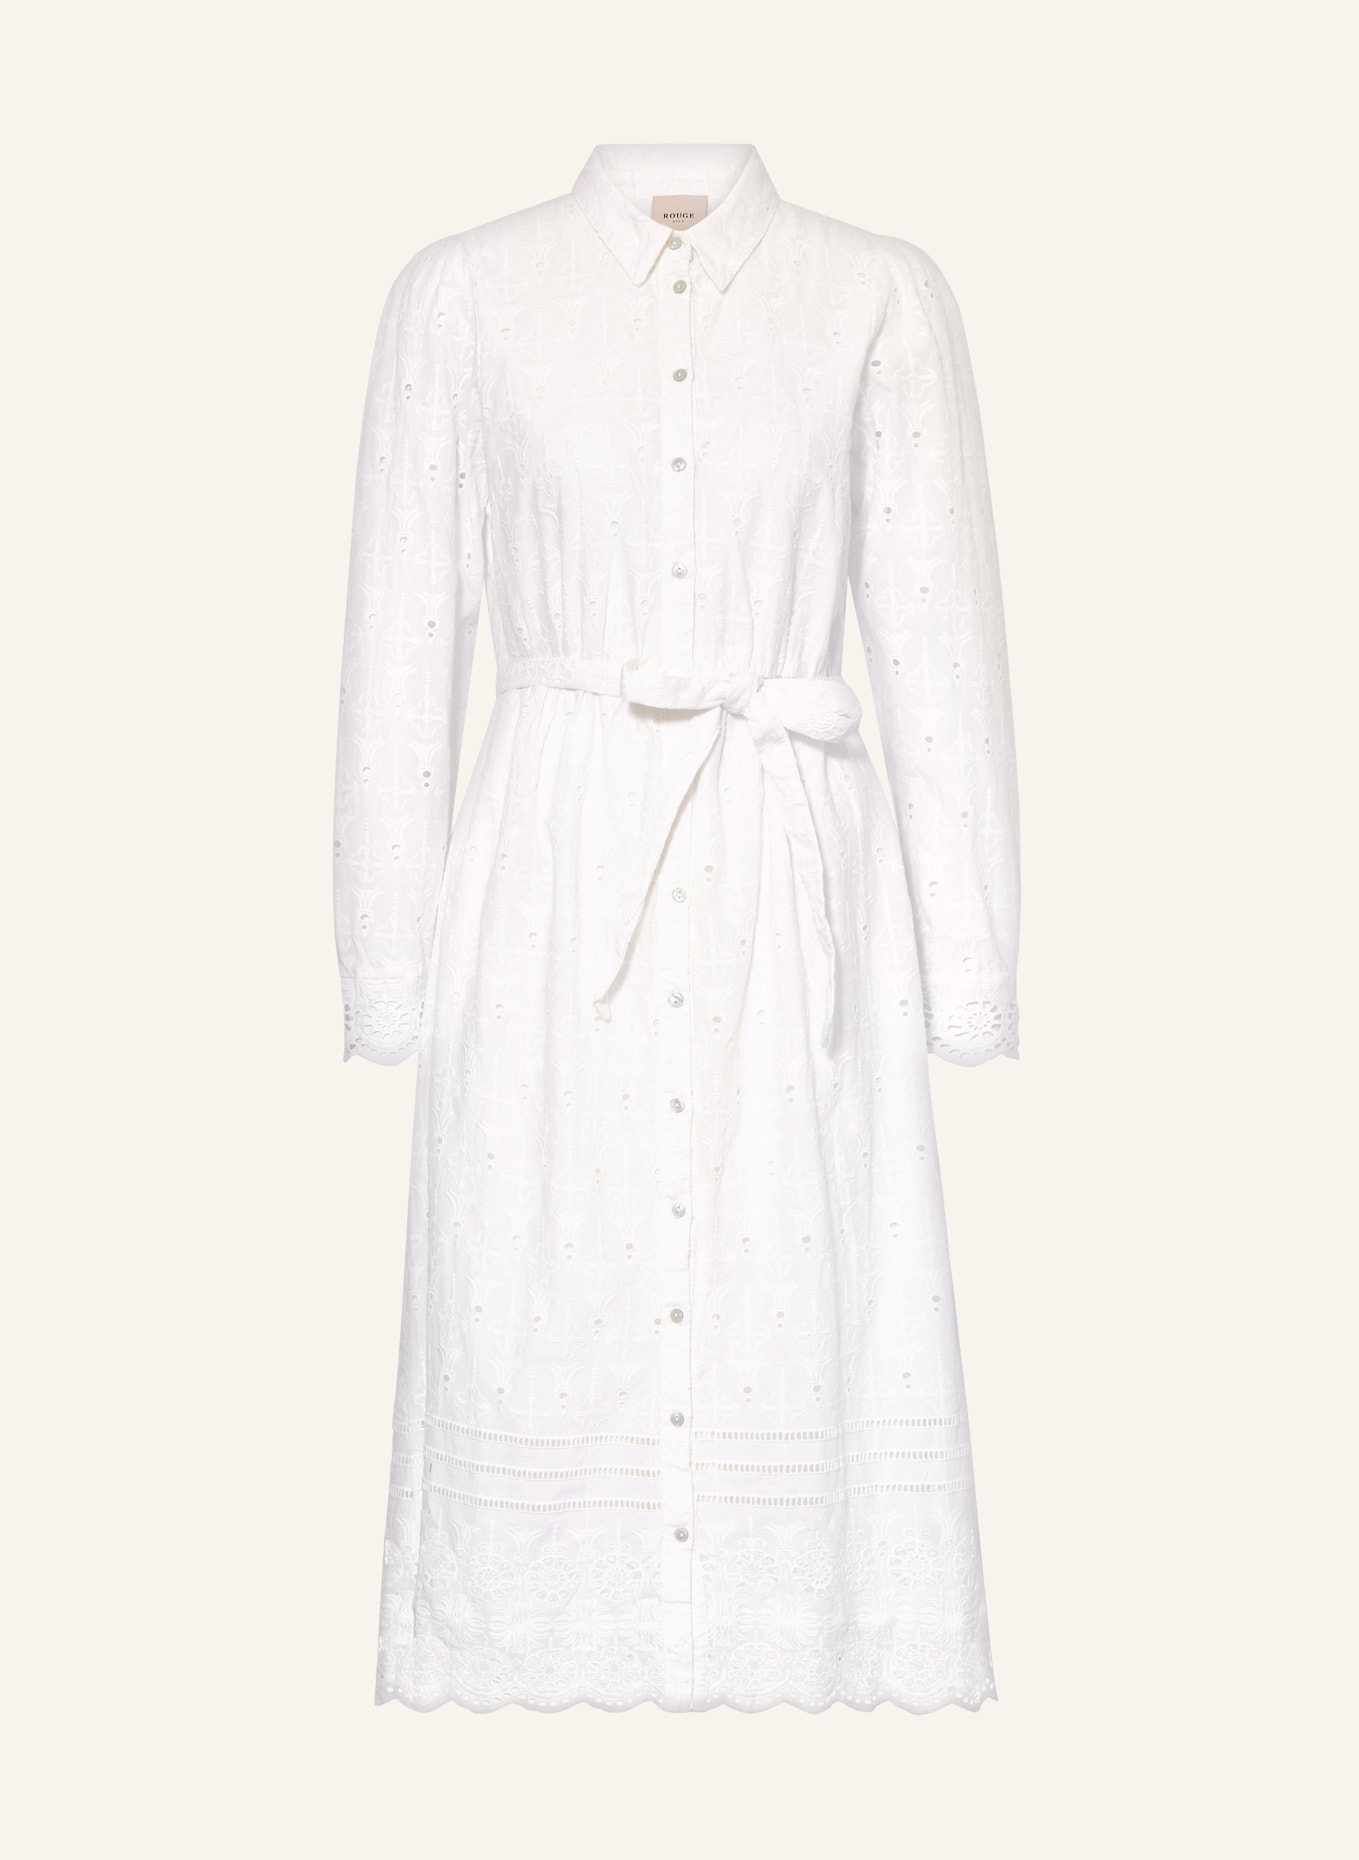 ROUGE VILA Shirt dress made of lace, Color: WHITE (Image 1)